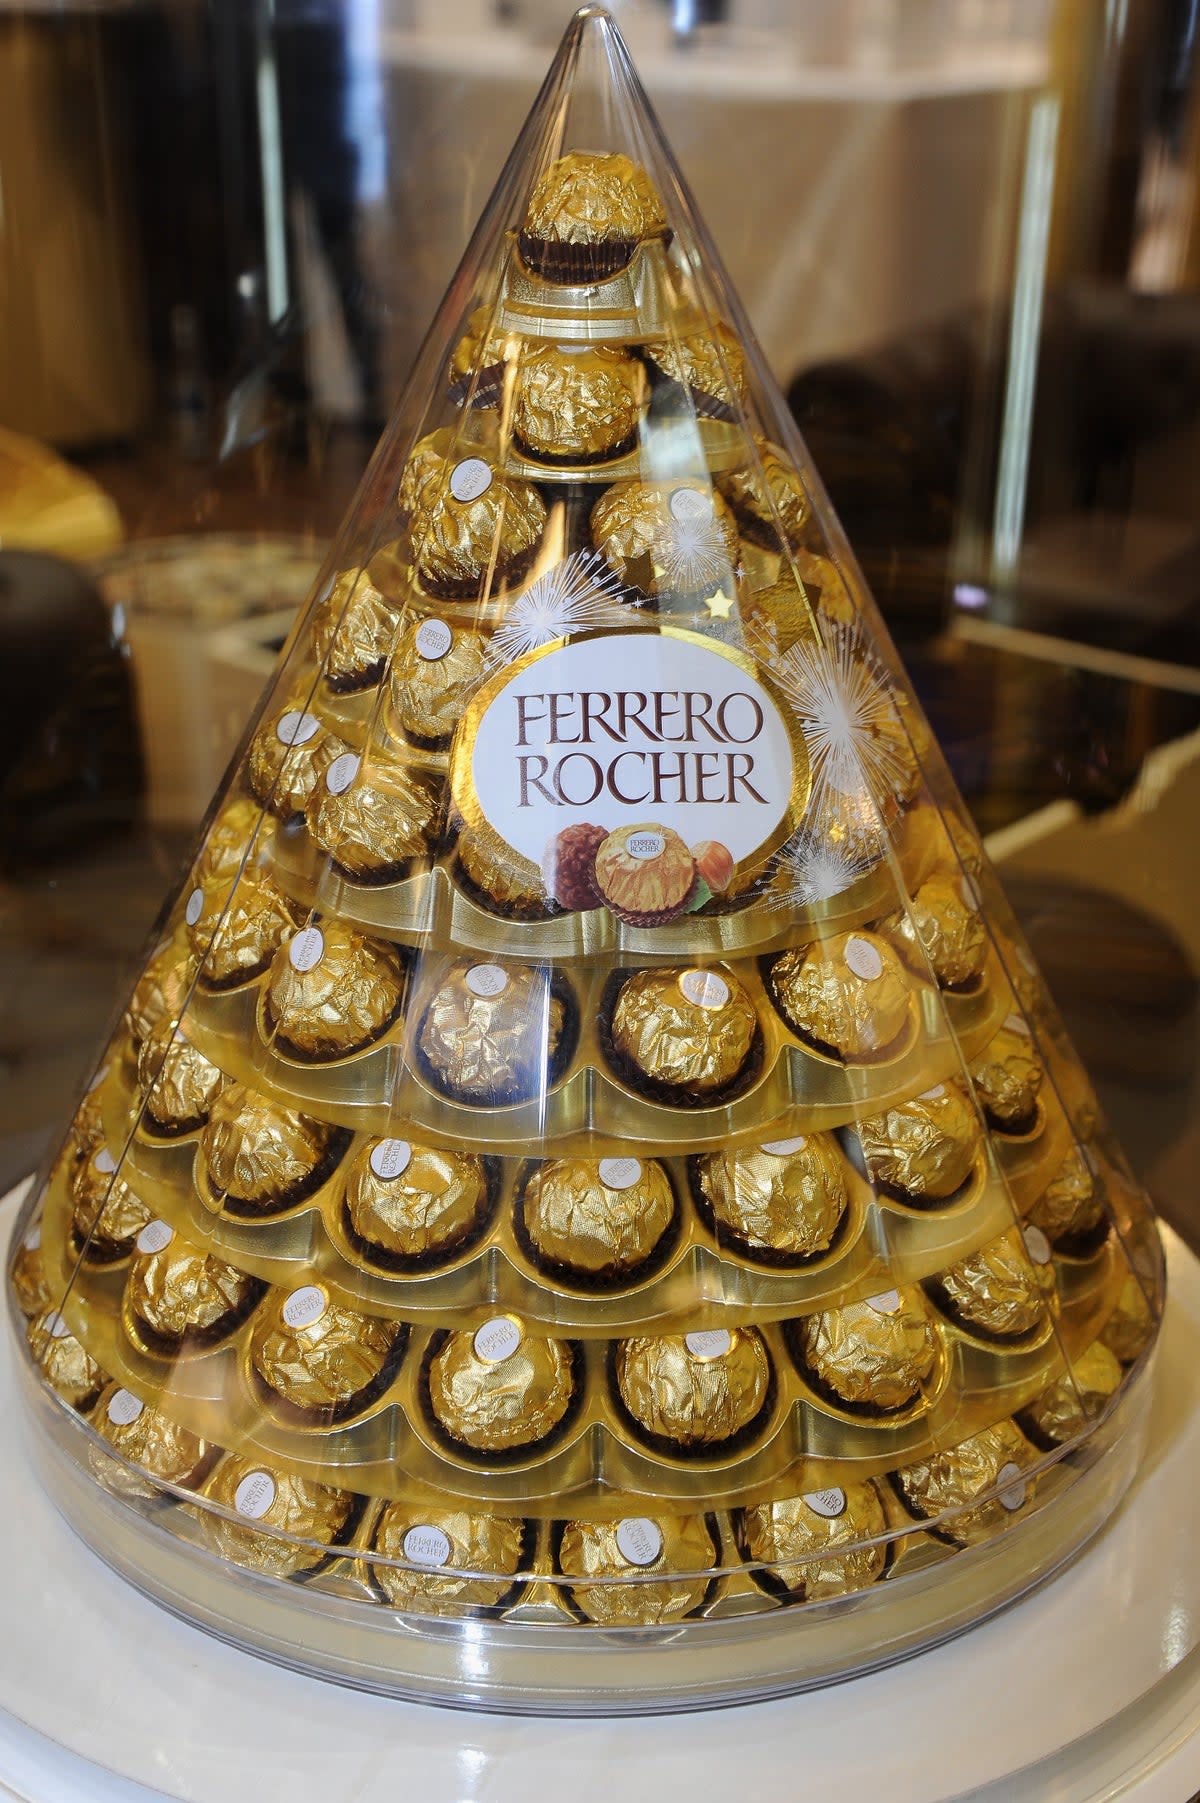 Six in 10 Ferrero Rocher chocolates are sold in the final three months of the year, according to a 2015 report (Pascal Le Segretain/Getty Images)